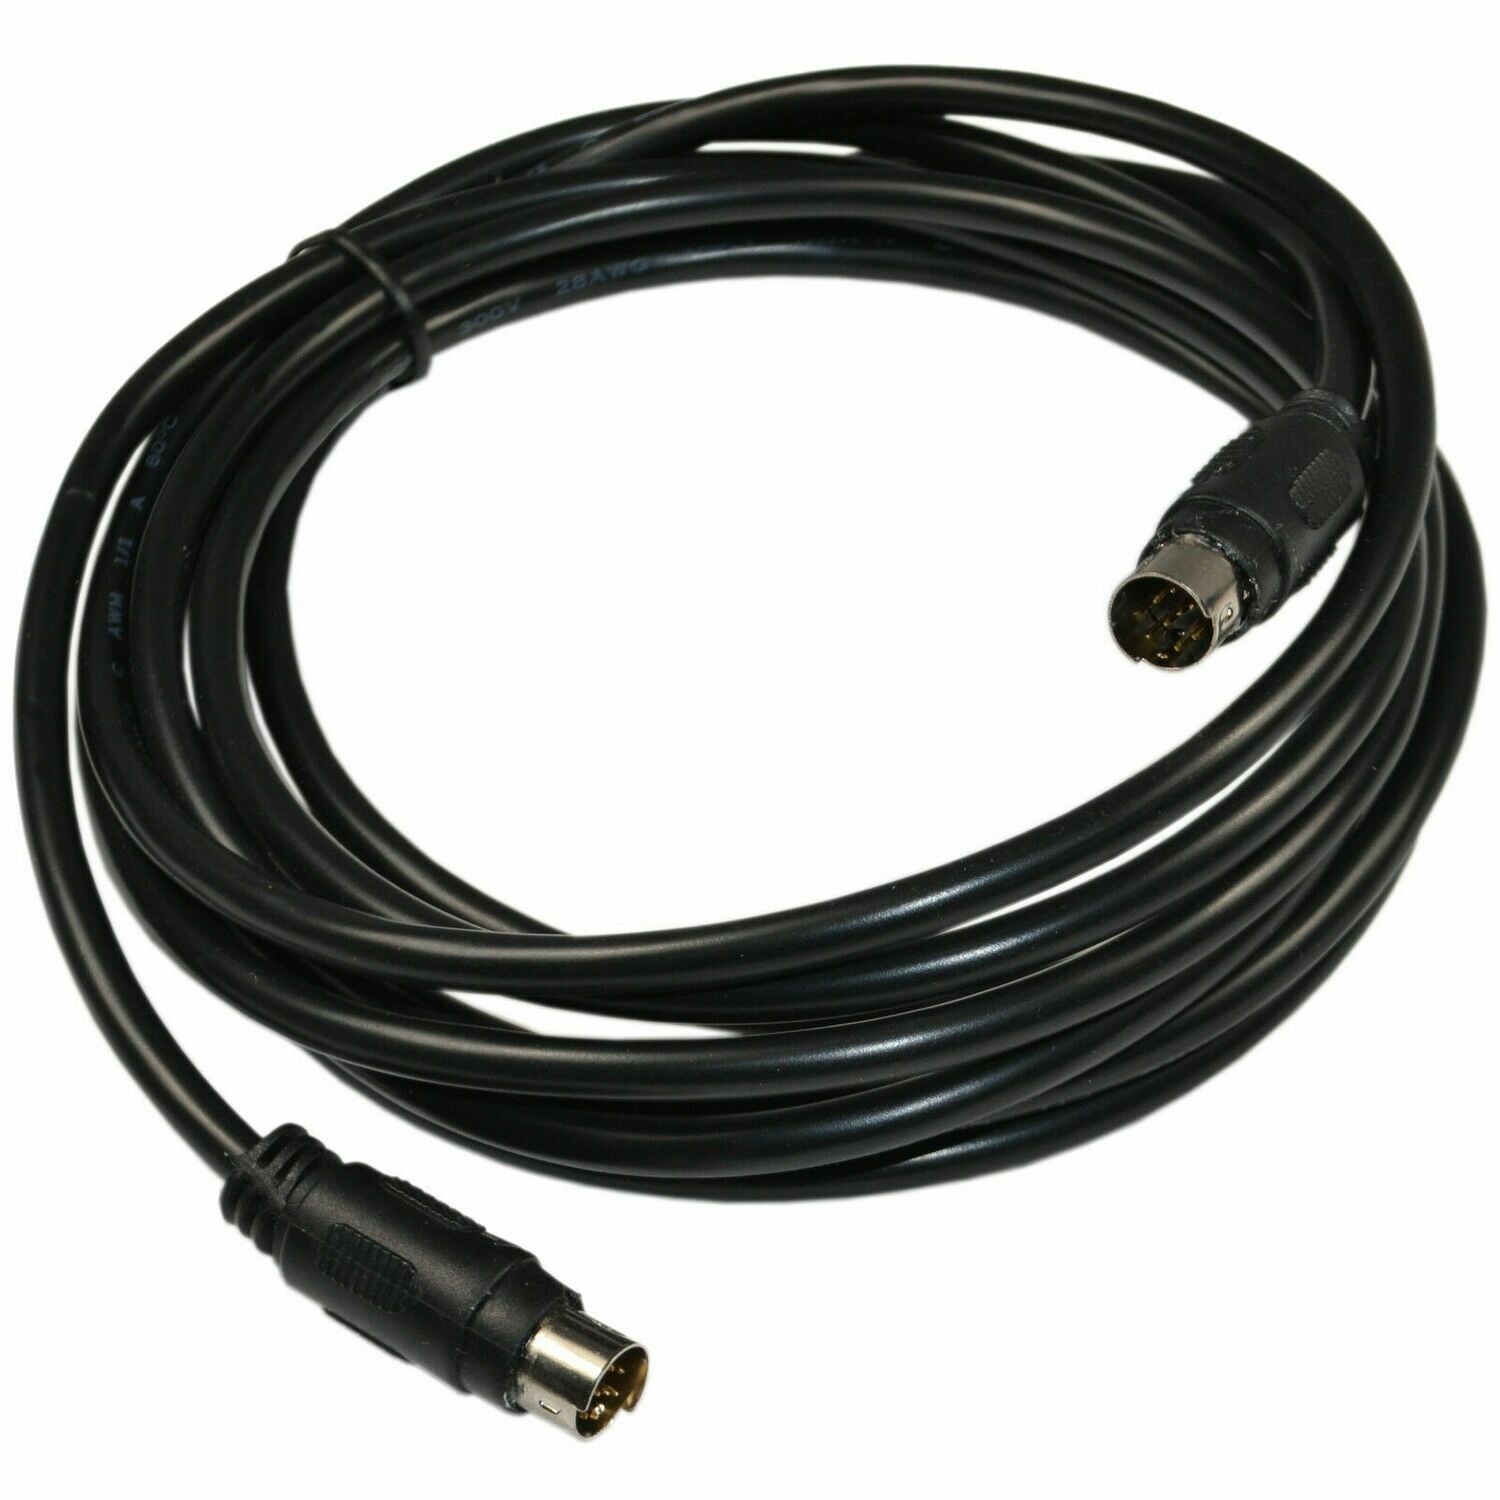 9ft ' long Acoustimass audio input Cable 9 pin male  for Bose Lifestyle PS28 Series III